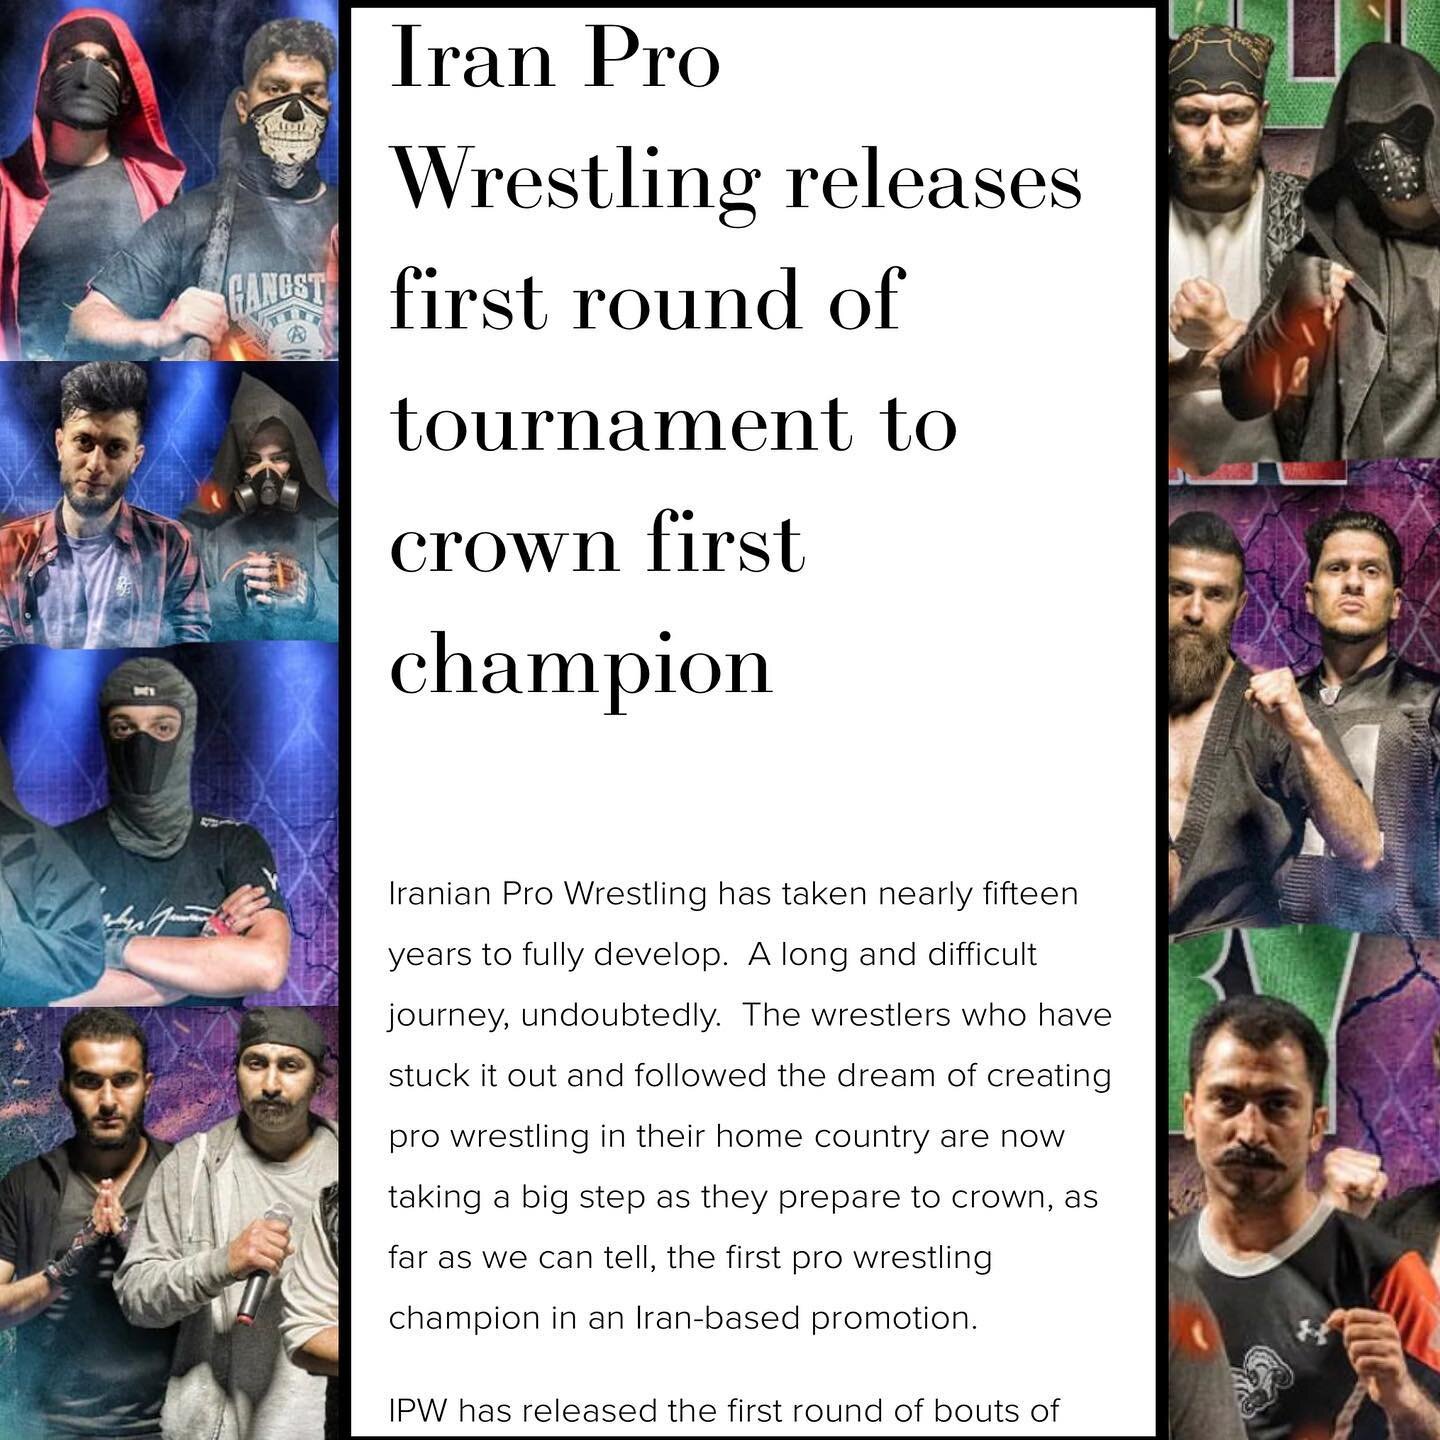 New on wrestlemap.com!  @ipw_iranprowrestling has released the first round of the Iranian Glory tournament which will crown the first IPW champion!

  _____________________________ 

#wrestling #prowrestling #prowrestler #indiewrestling #wrestlingnew